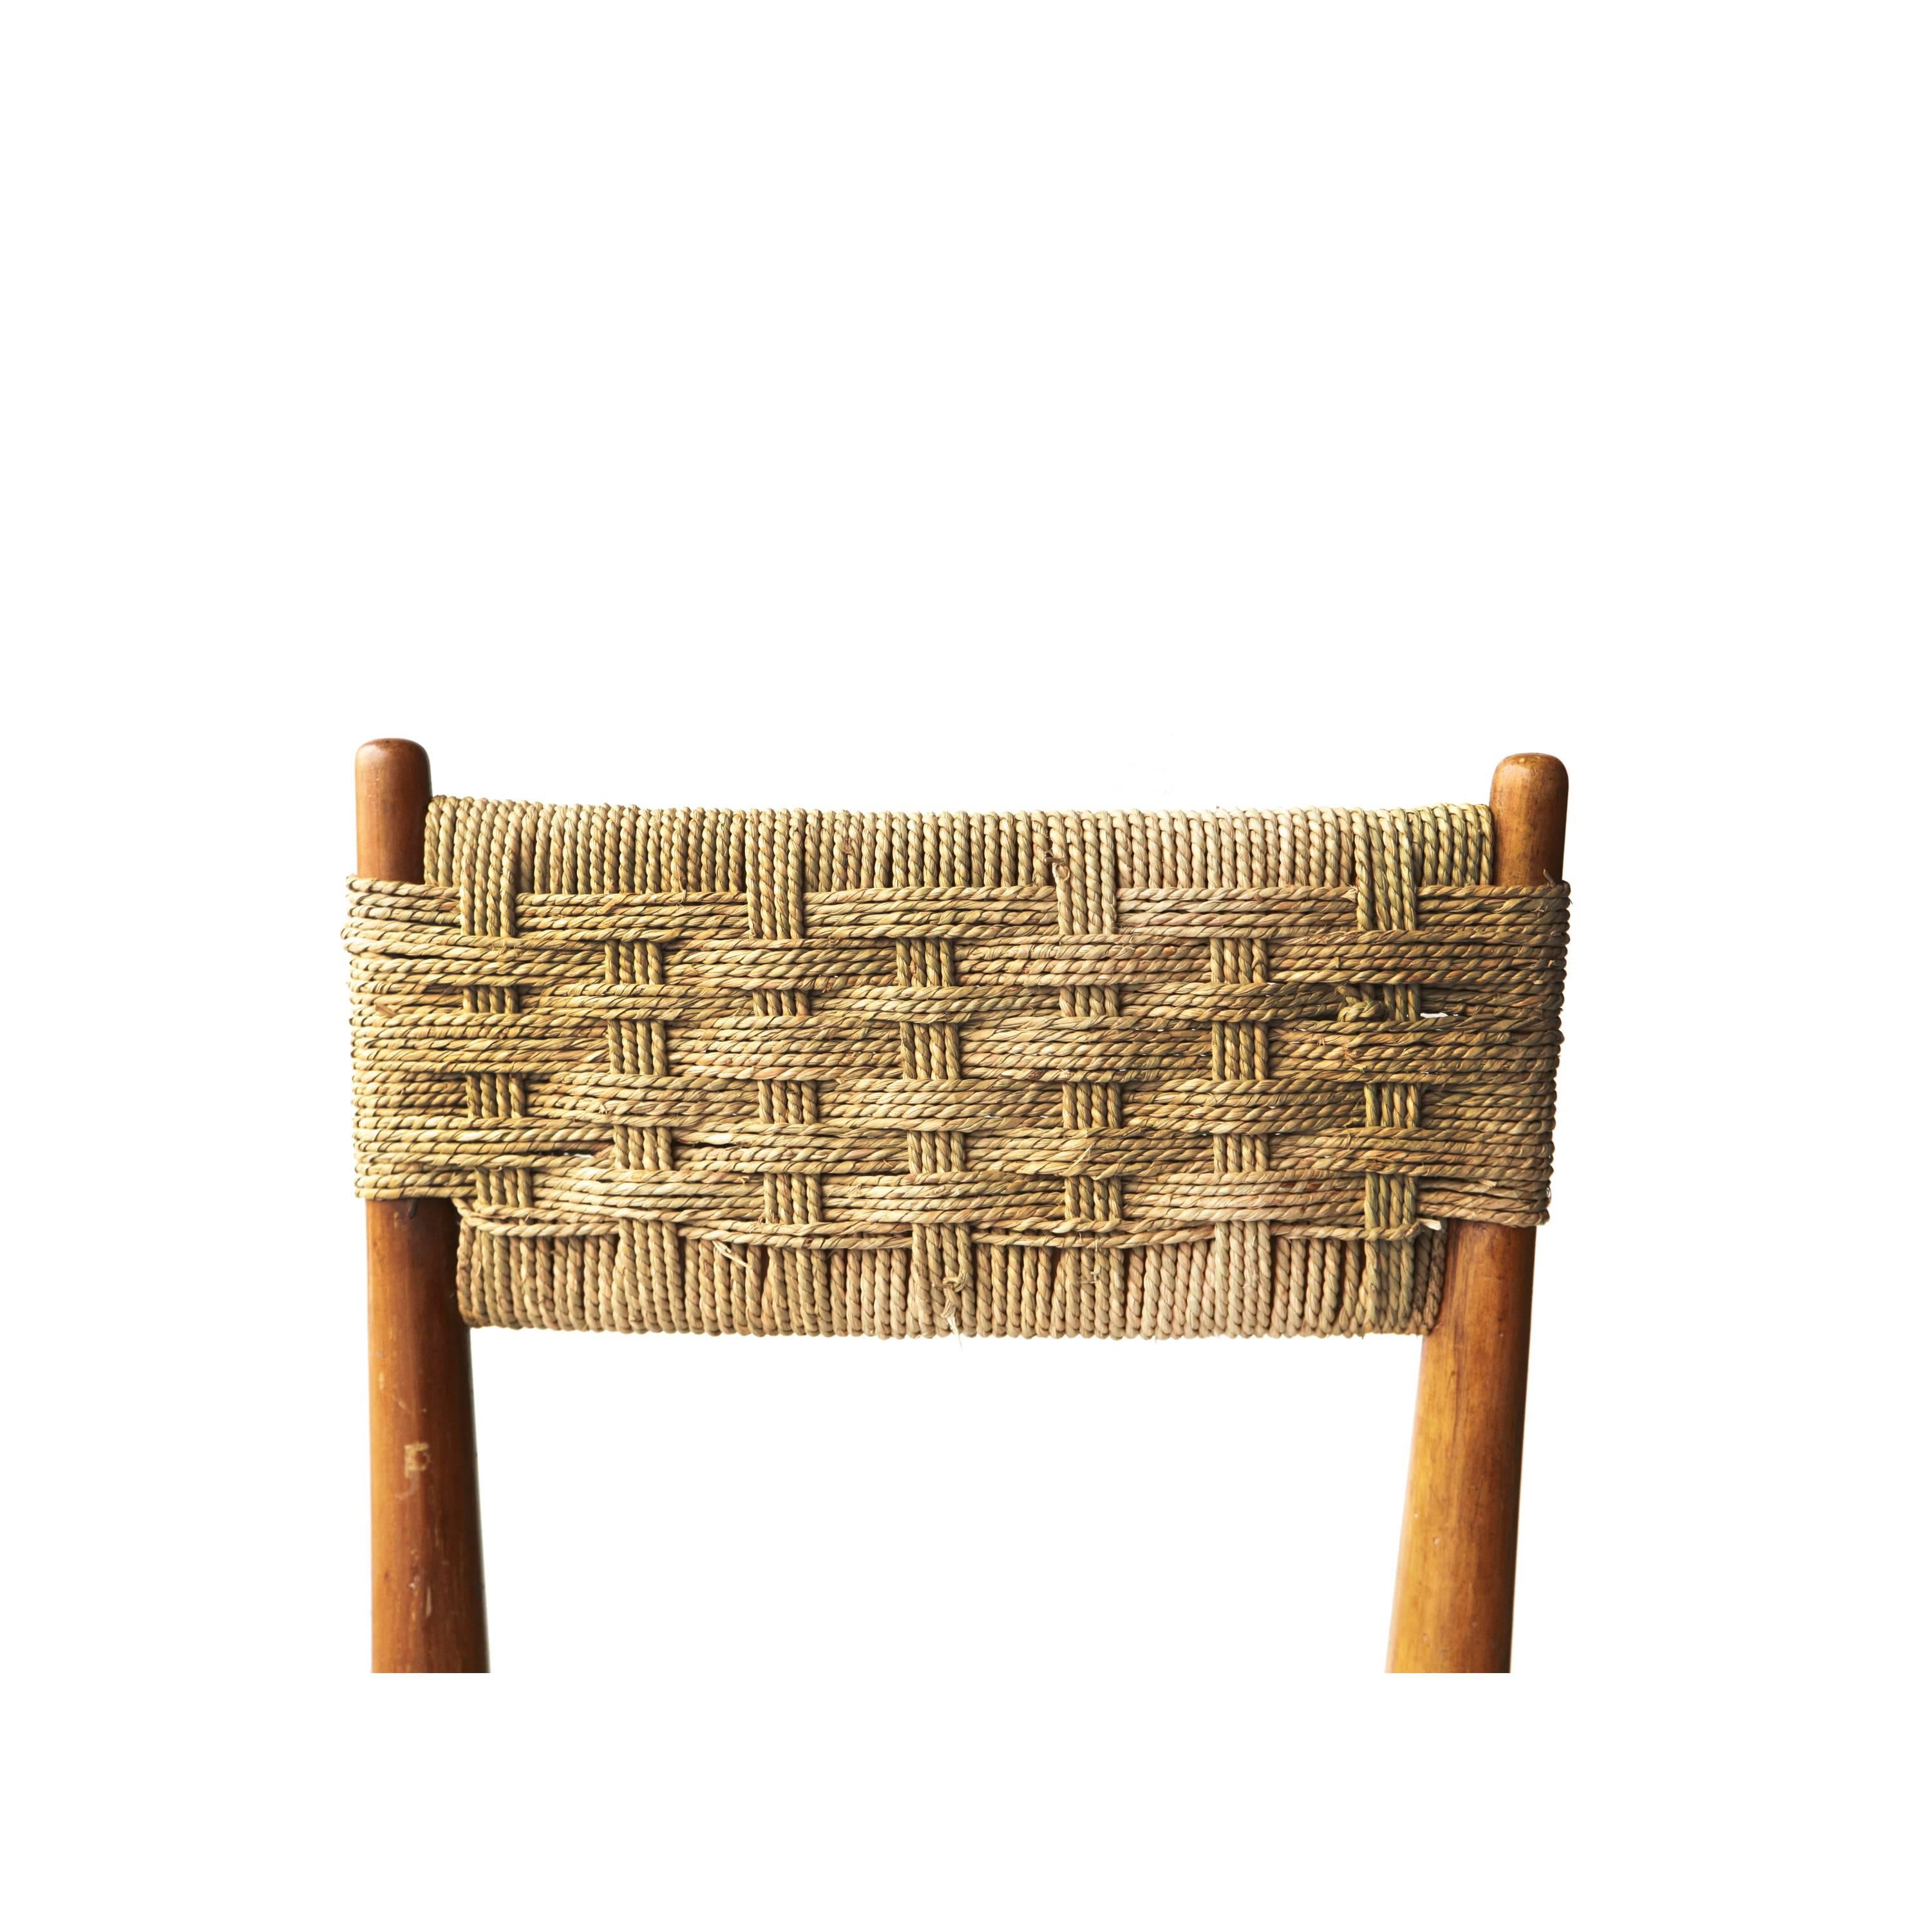 Italian Set of Six Chairs with Wooden Structure and Natural Fiber, Italia, 1950